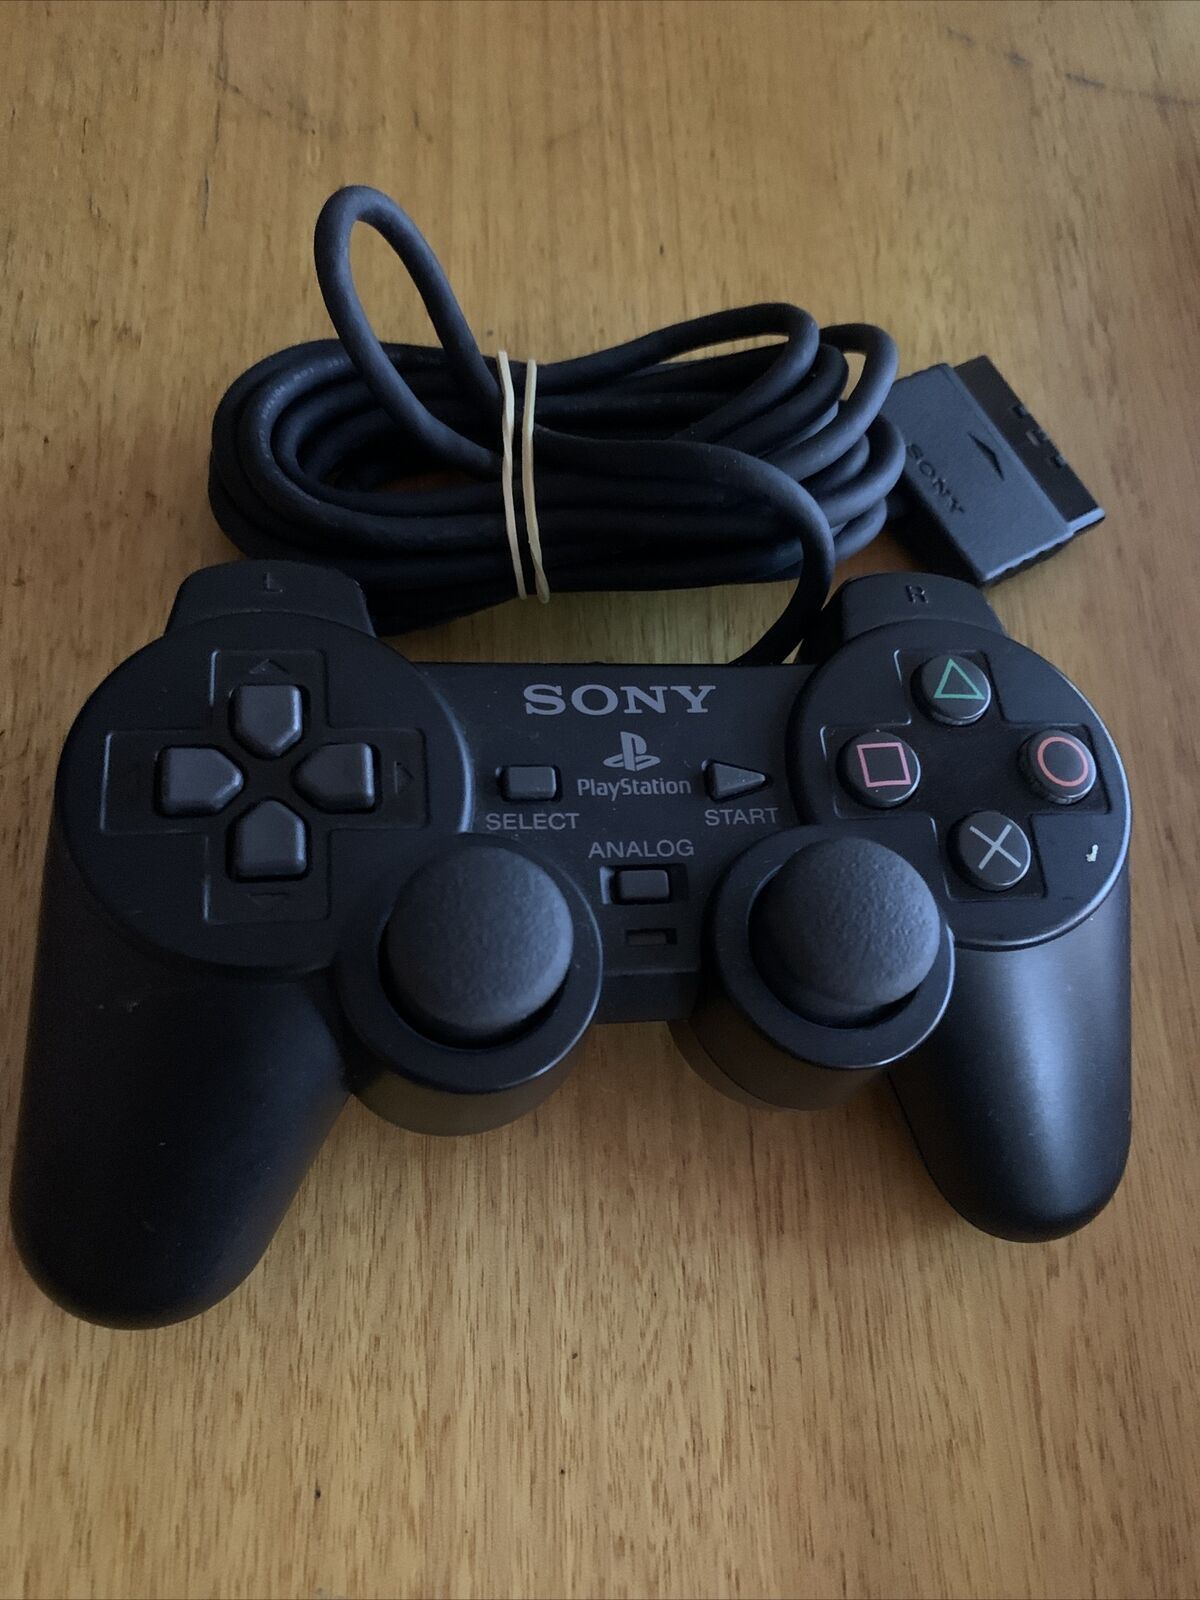 Genuine Sony Playstation 2 PS1 PS2 Analog Controller DualShock 2 Wired SCPH10010